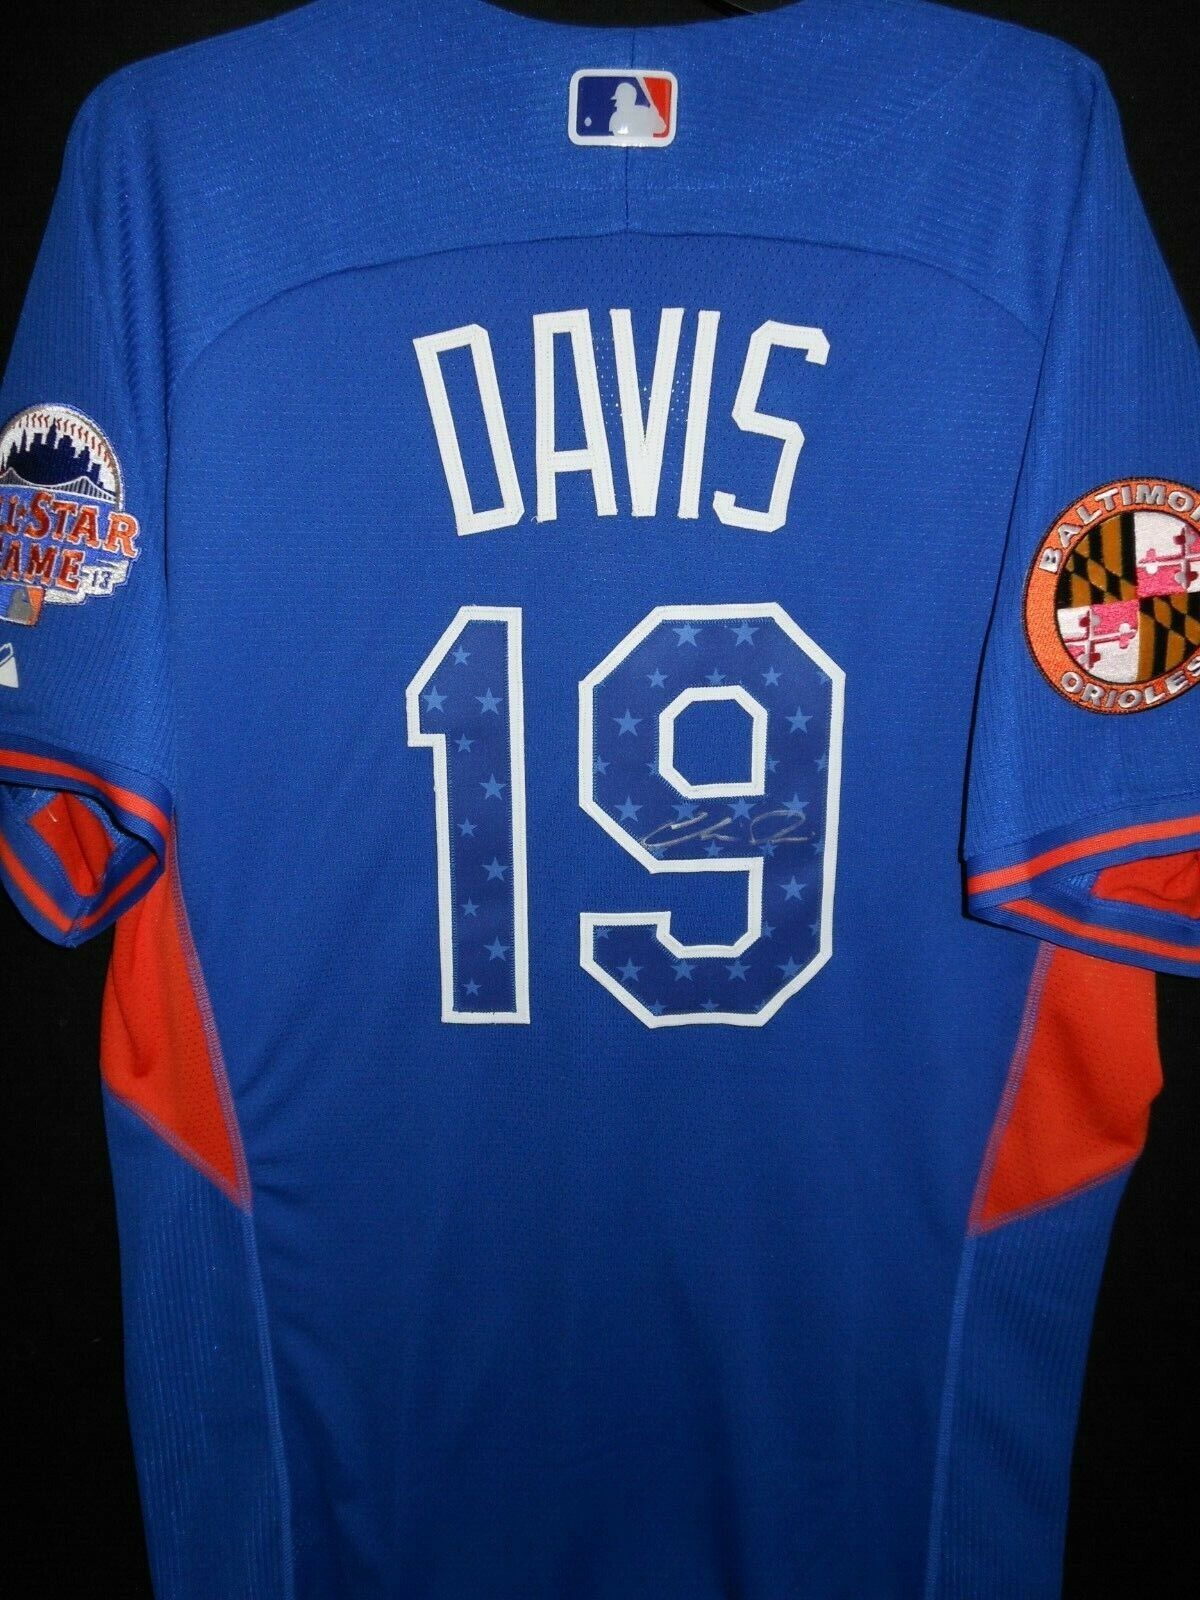 CHRIS DAVIS SIGNED 2013 ALL STAR JERSEY AUTHENTIC. MAJESTIC - BALTIMORE ORIOLES